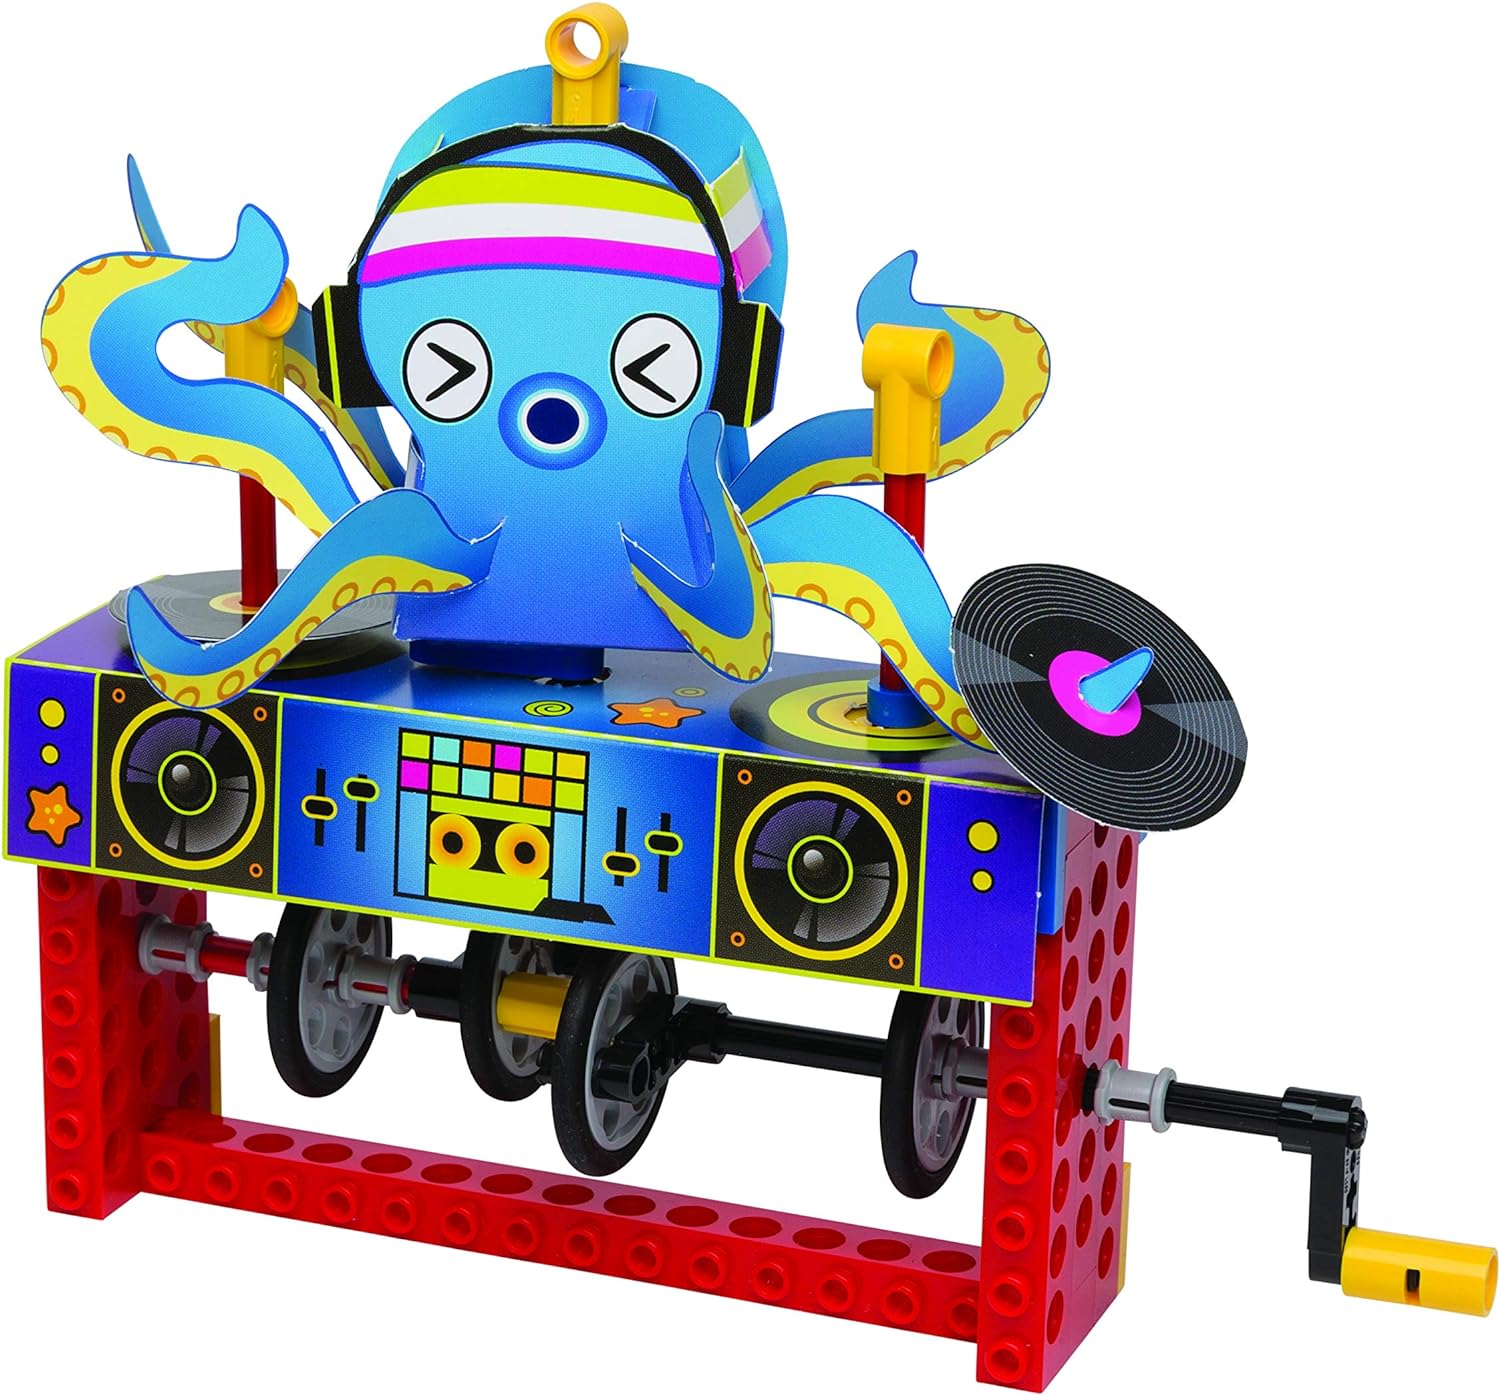 Klutz Lego Gear Bots Science/STEM Activity Kit for 8-12 years